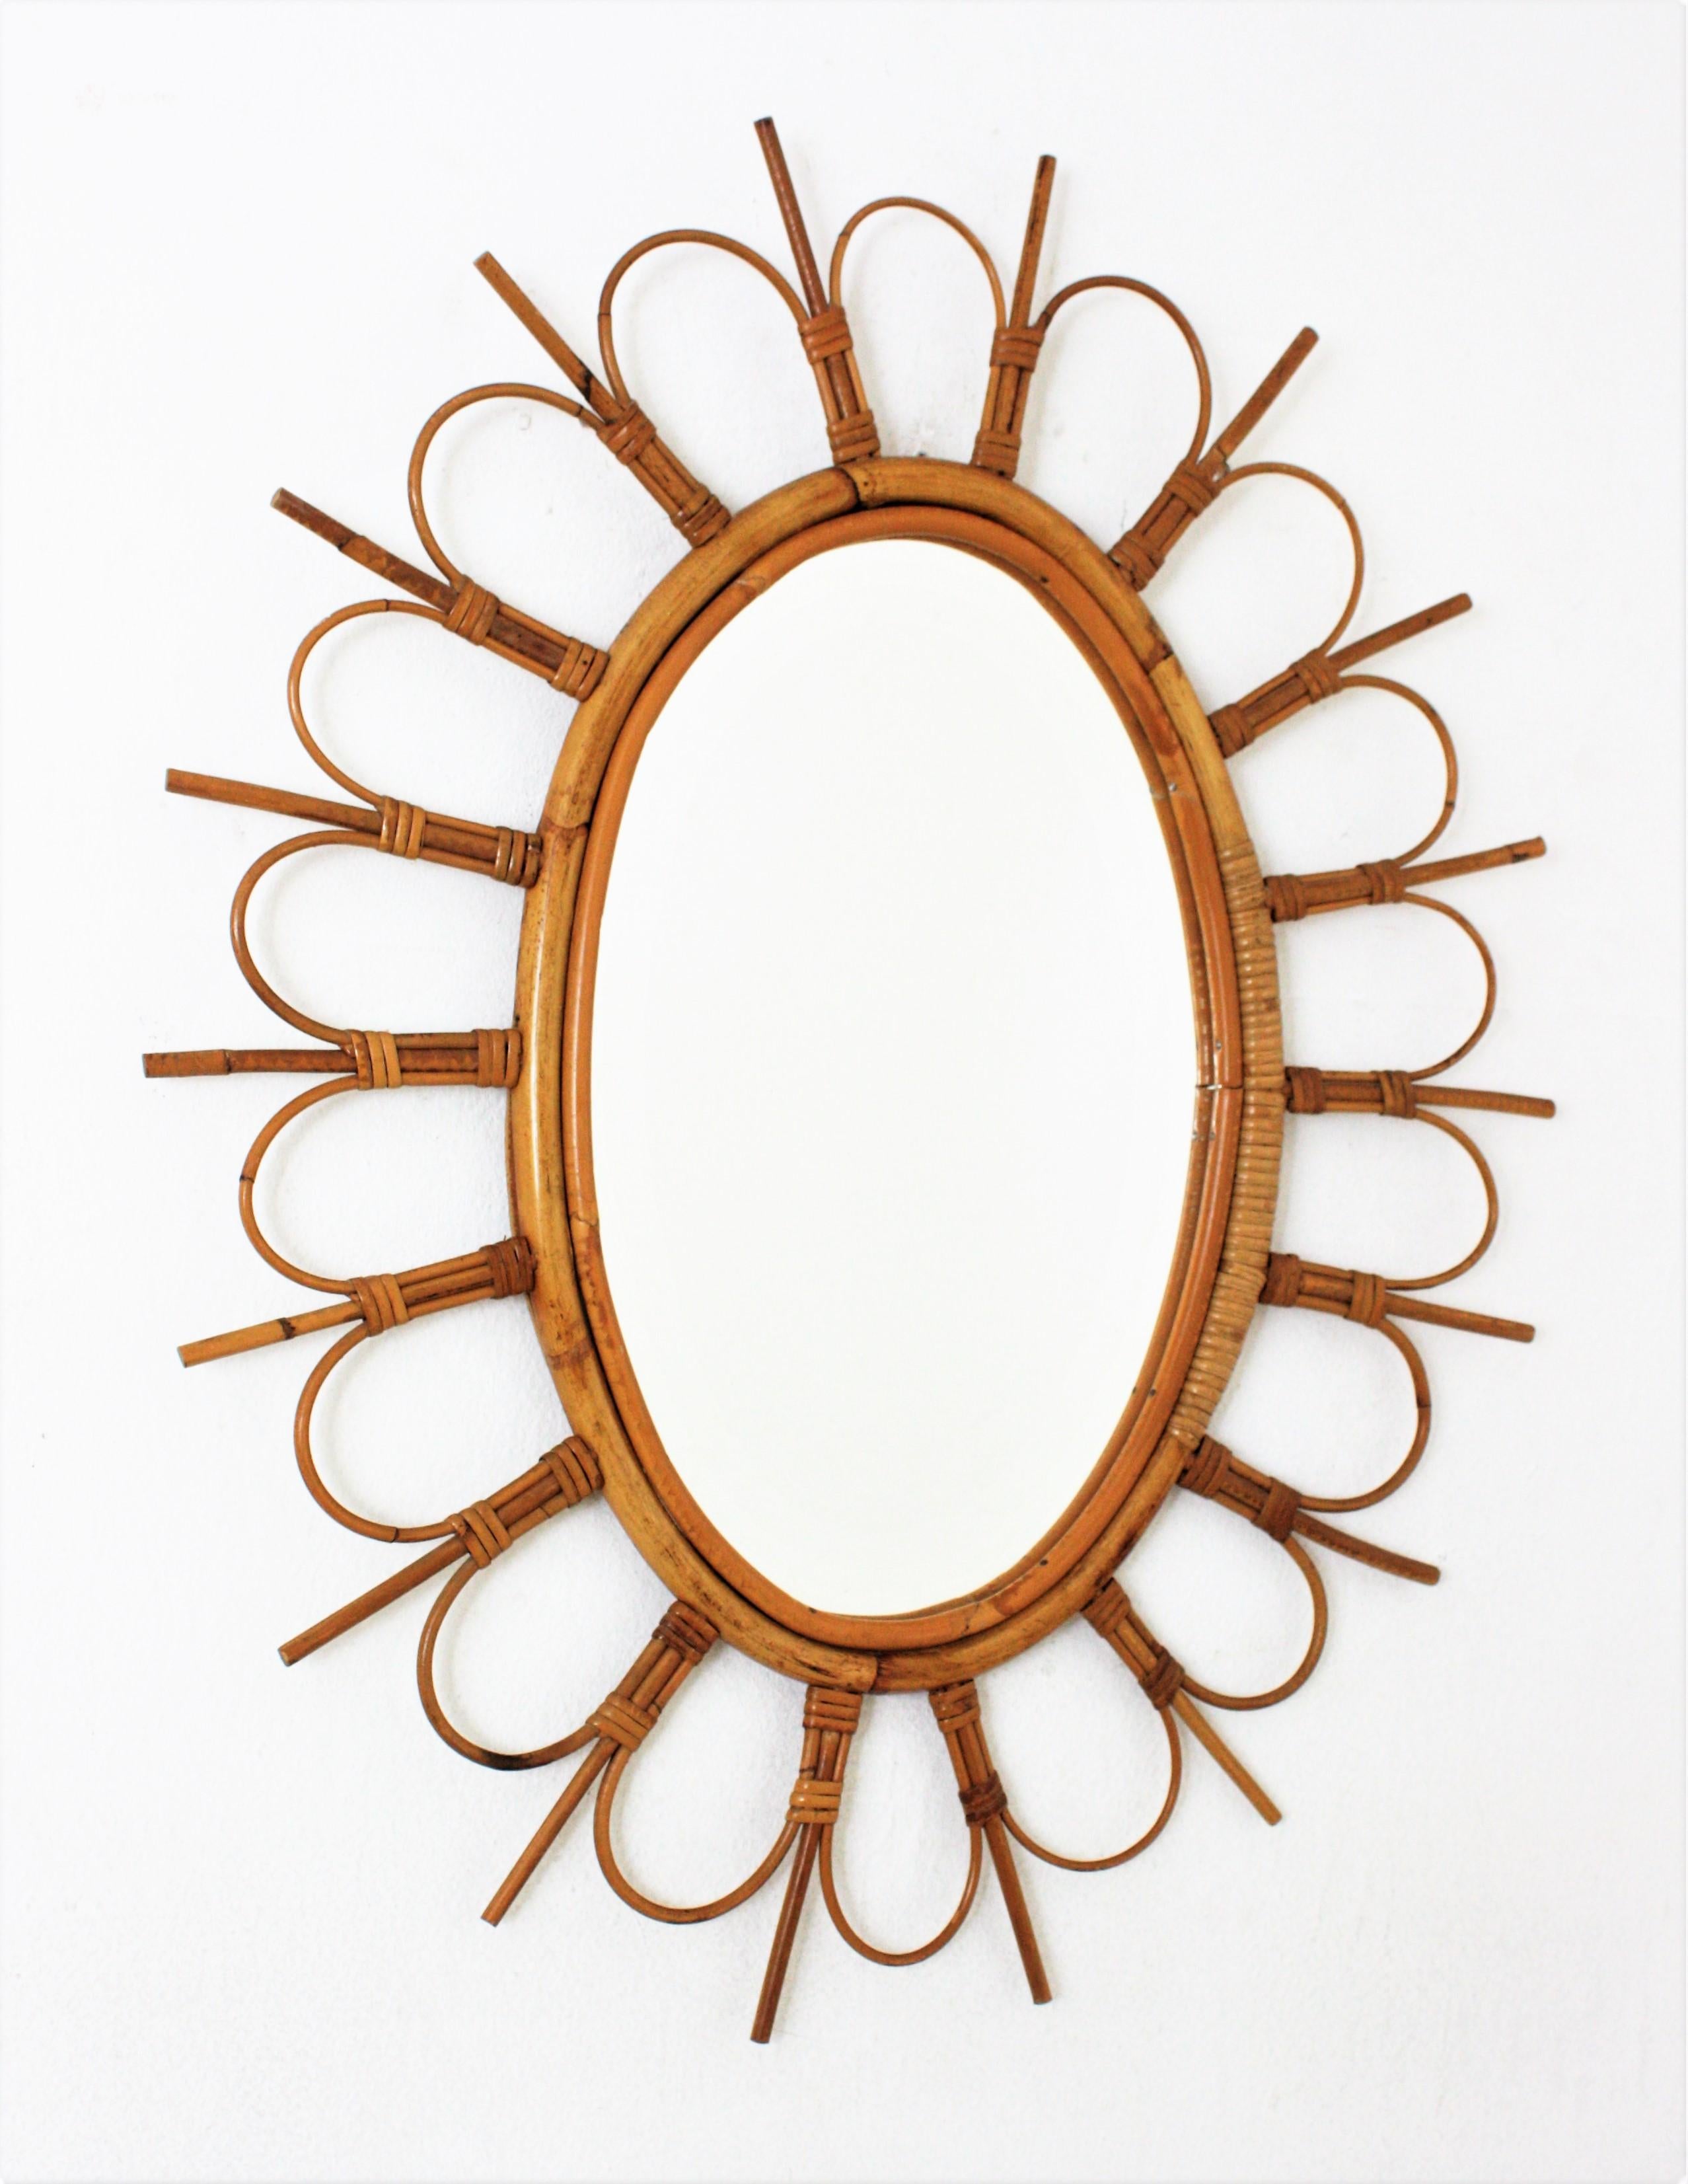 French Riviera rattan bamboo flower sunburst oval mirror. France, 1960s.
This eye-catching rattan wall mirror features an oval bamboo frame surrounded by rattan canes as petals in flower disposition alternating with sticks creating a sunburst